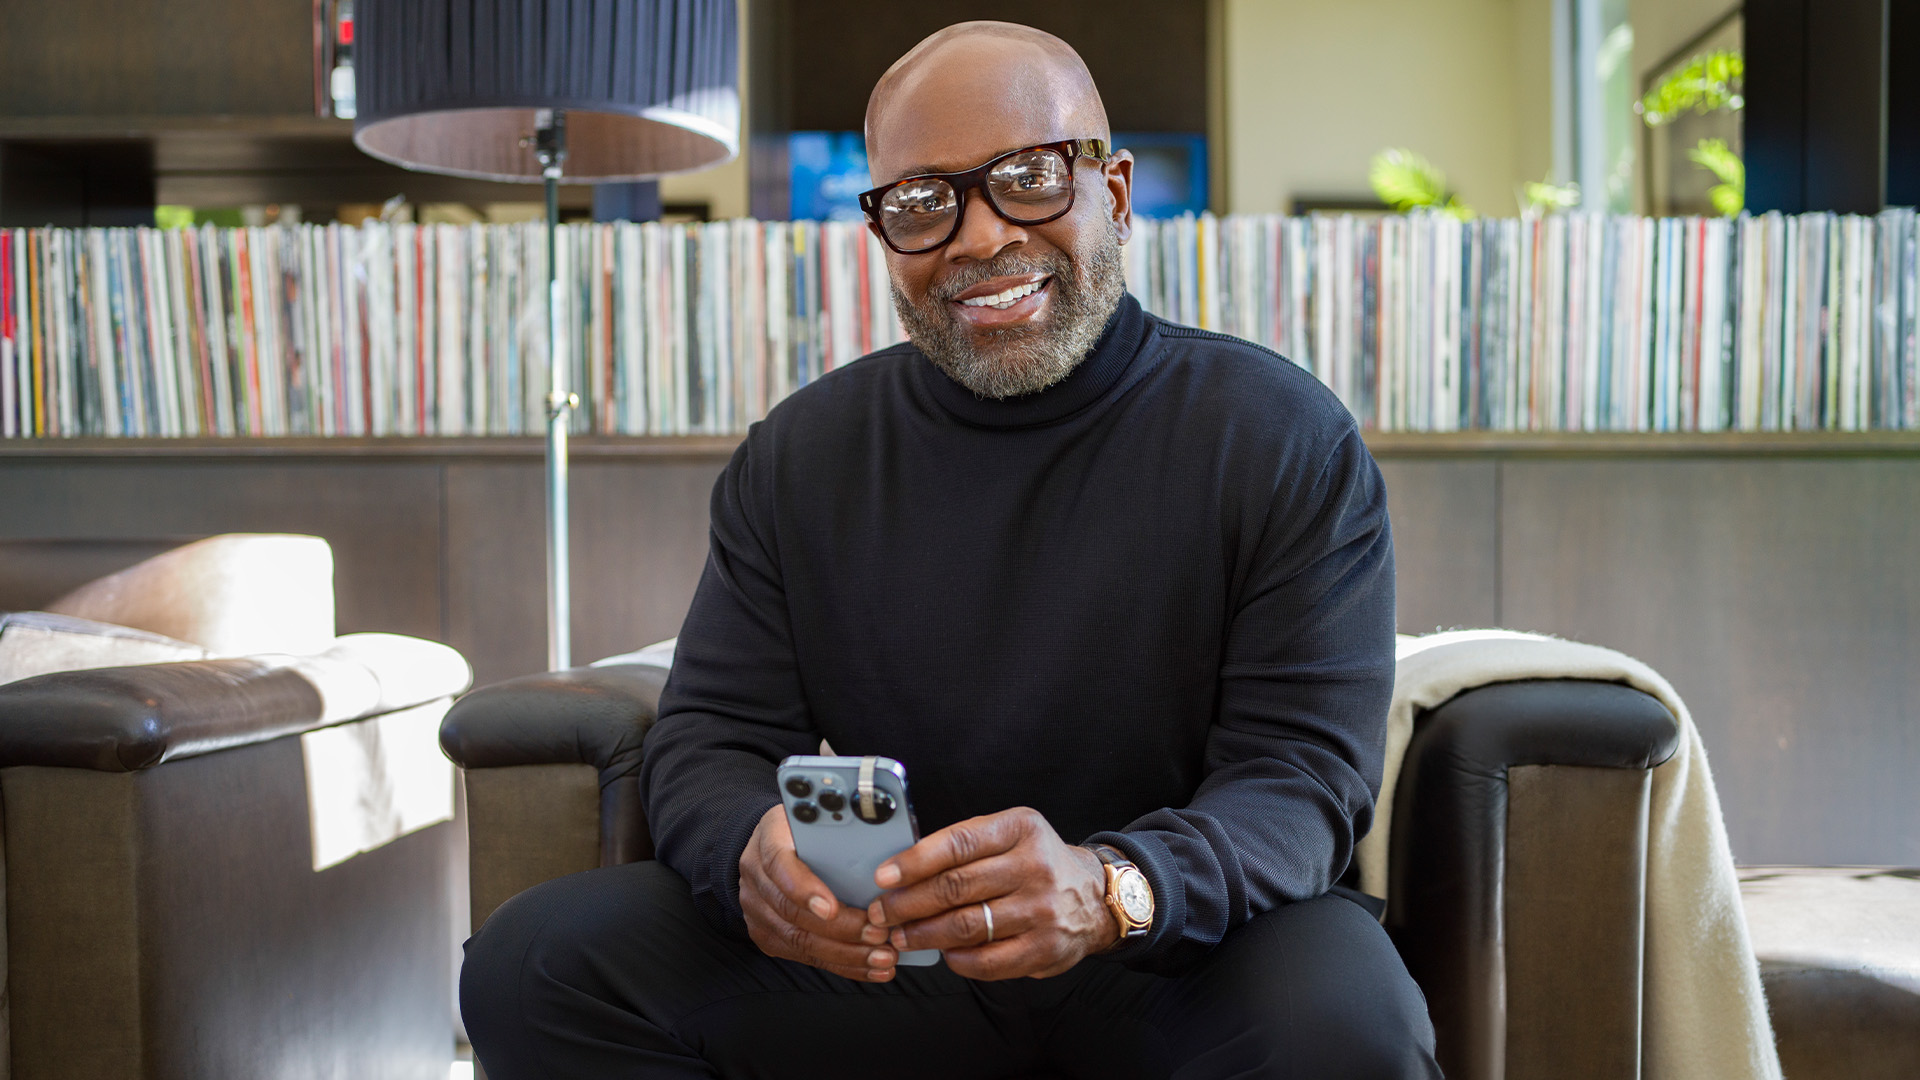 L.A. Reid, Burna Boy Among Investors In Black-Led MOON Ultra, One Of TIME’s 'Best Inventions Of 2020'